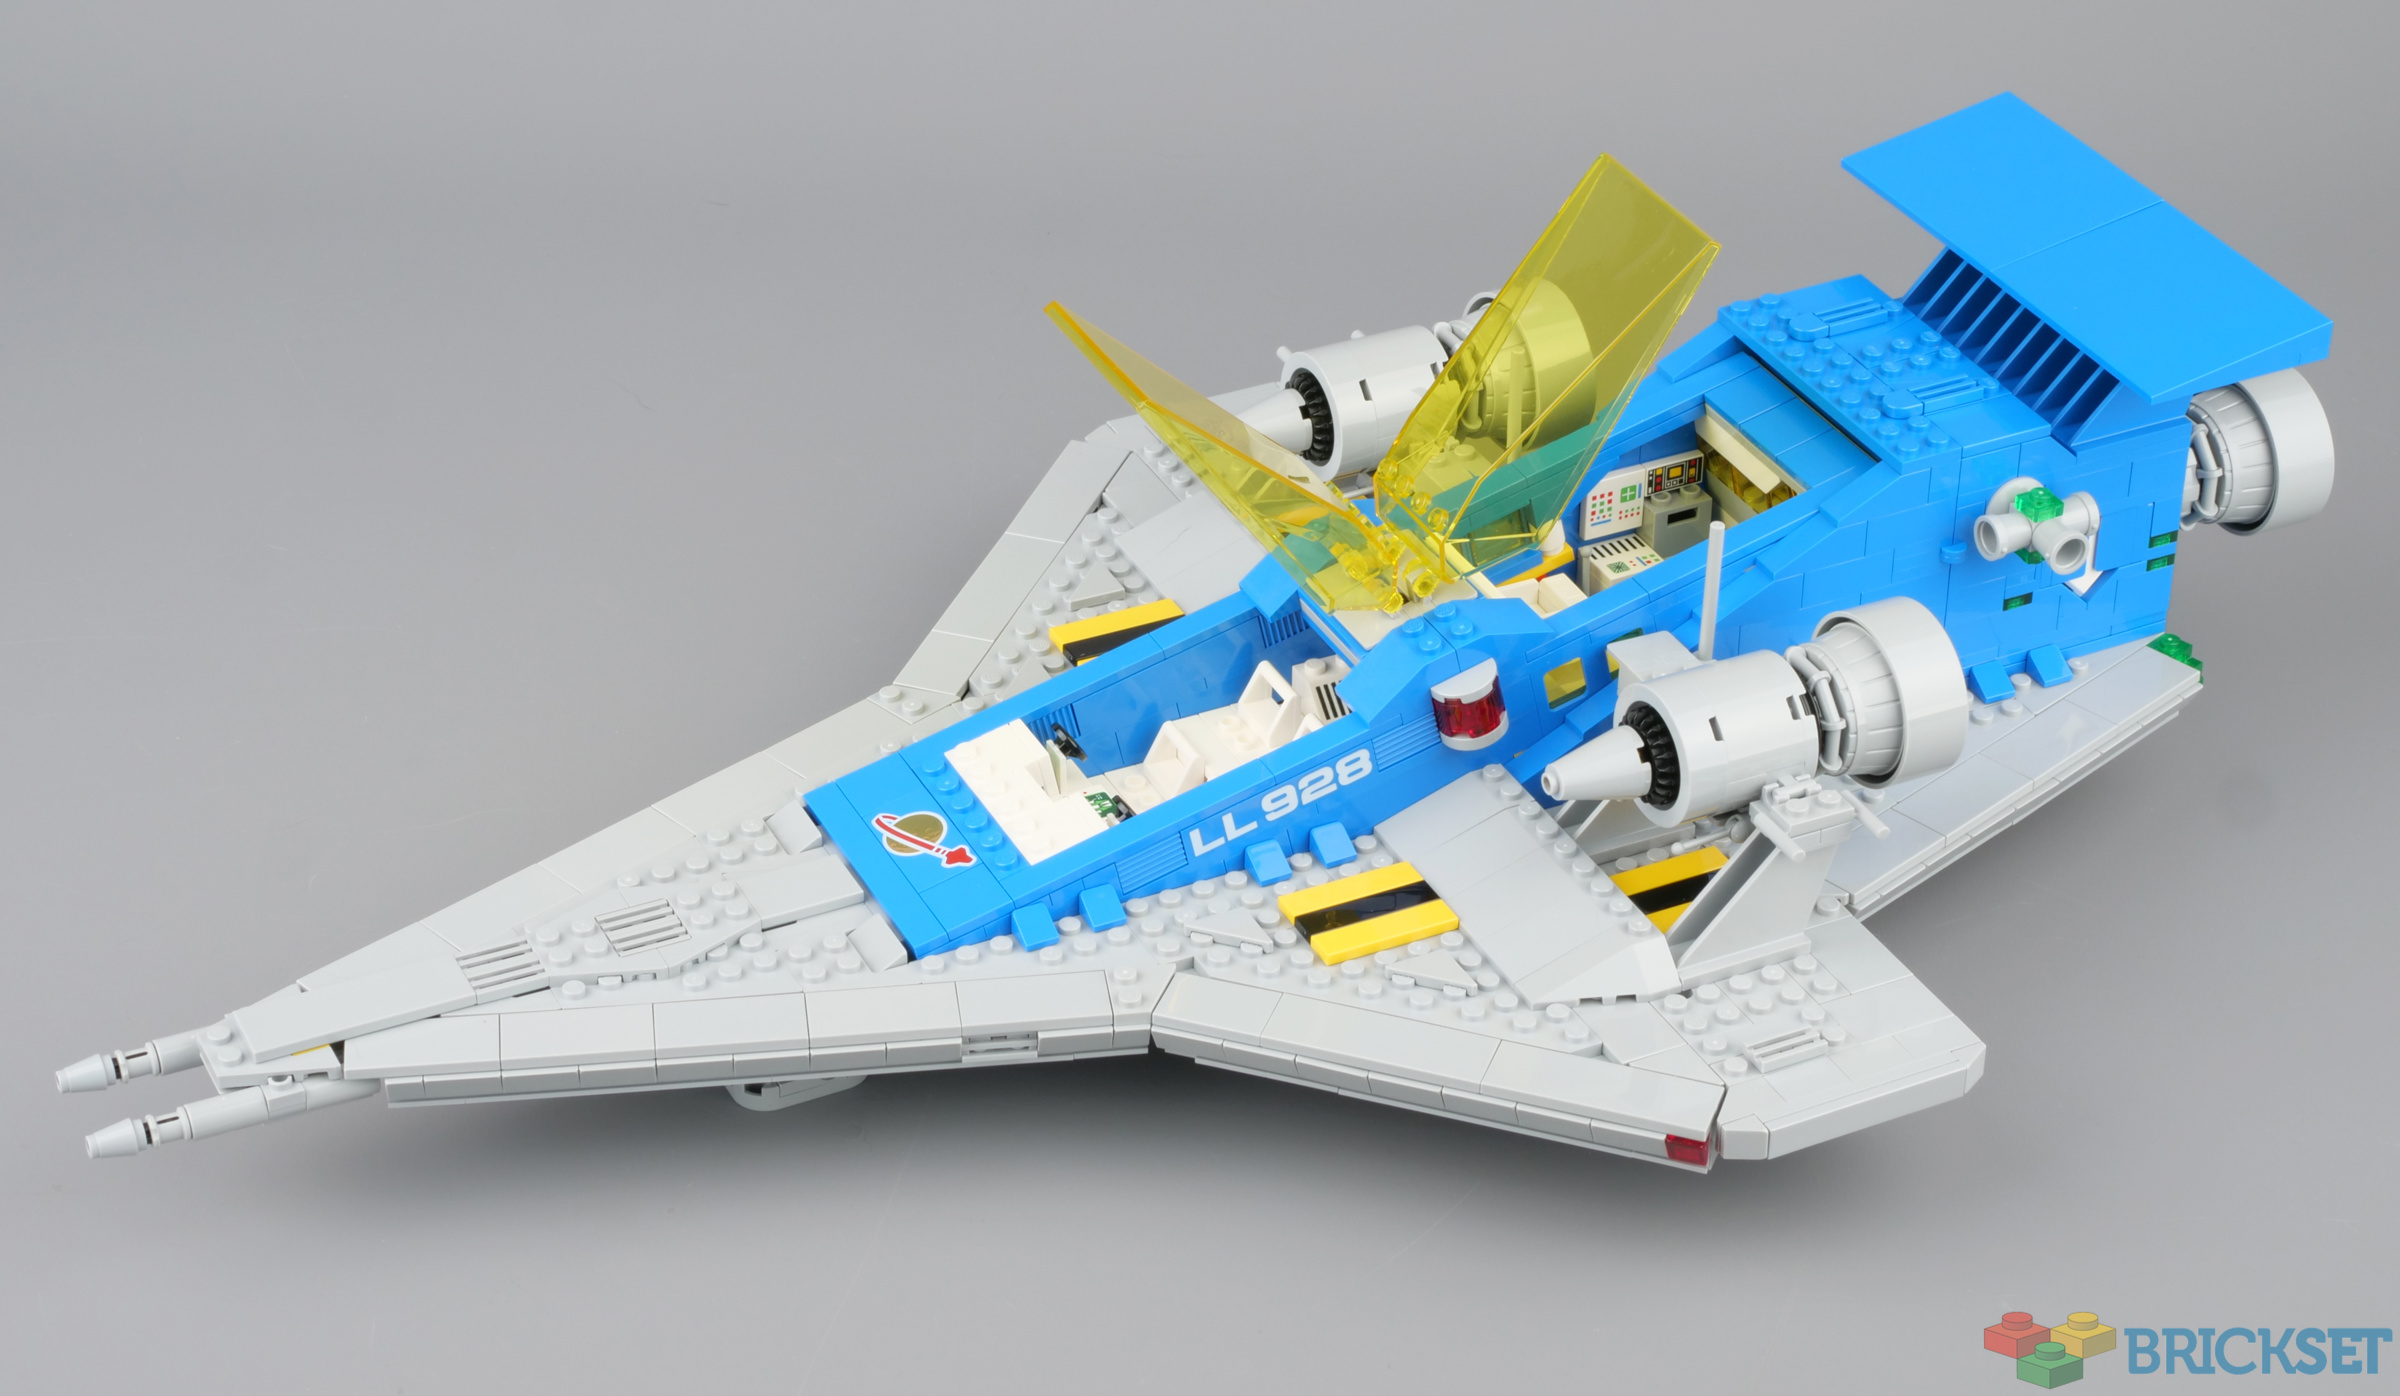 Lego's original spaceship, the Galaxy Explorer, is back and better